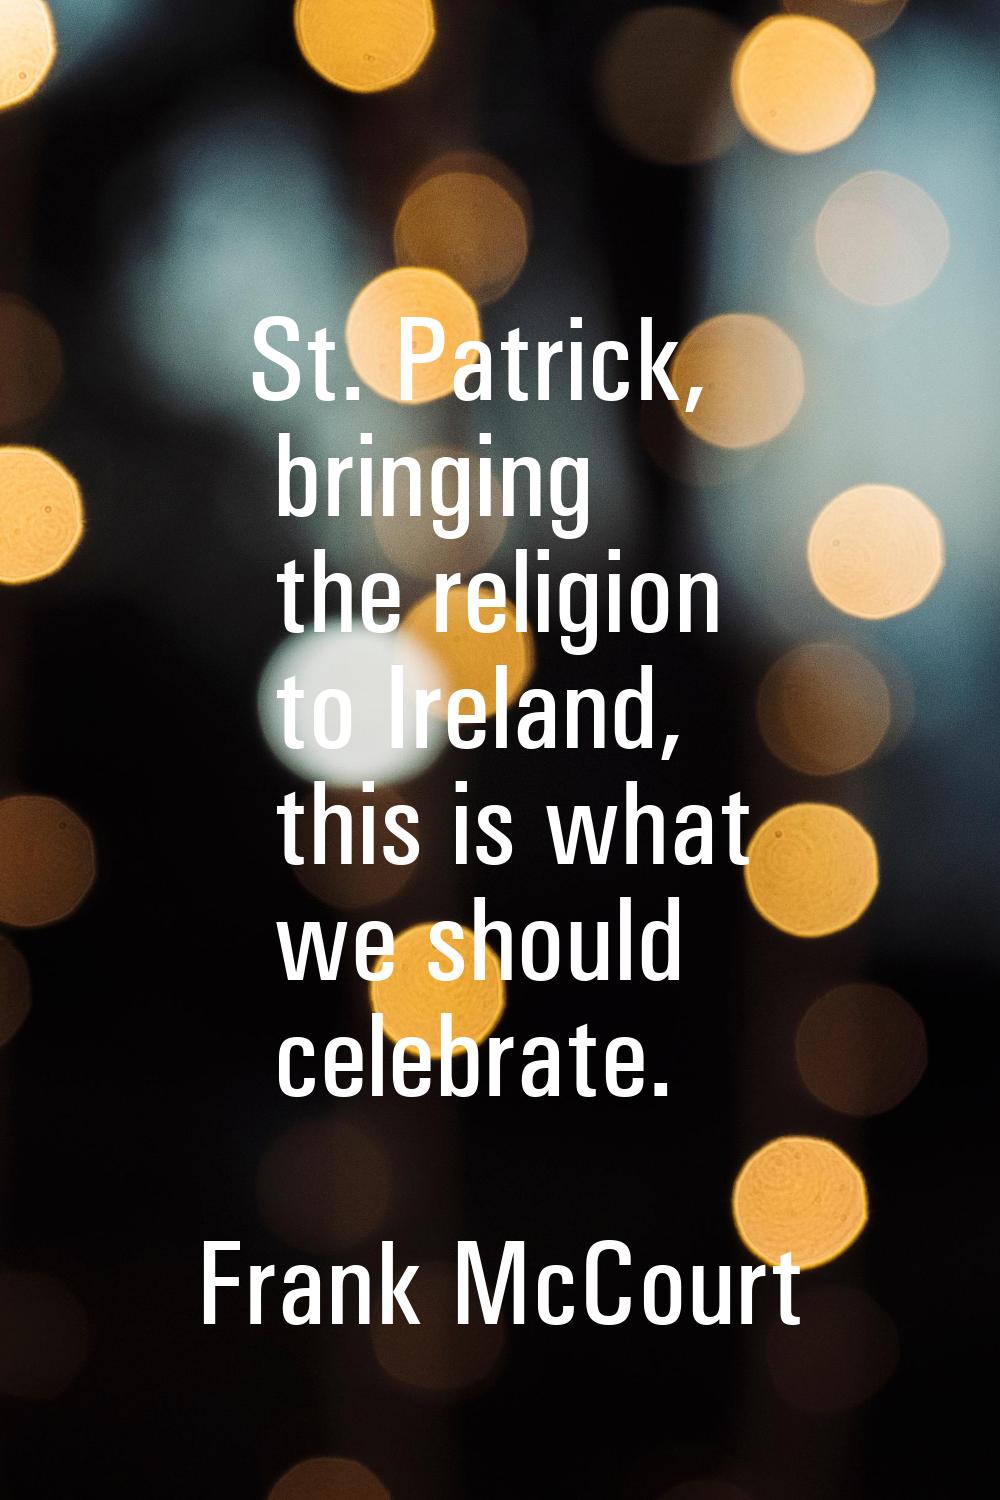 St. Patrick, bringing the religion to Ireland, this is what we should celebrate.